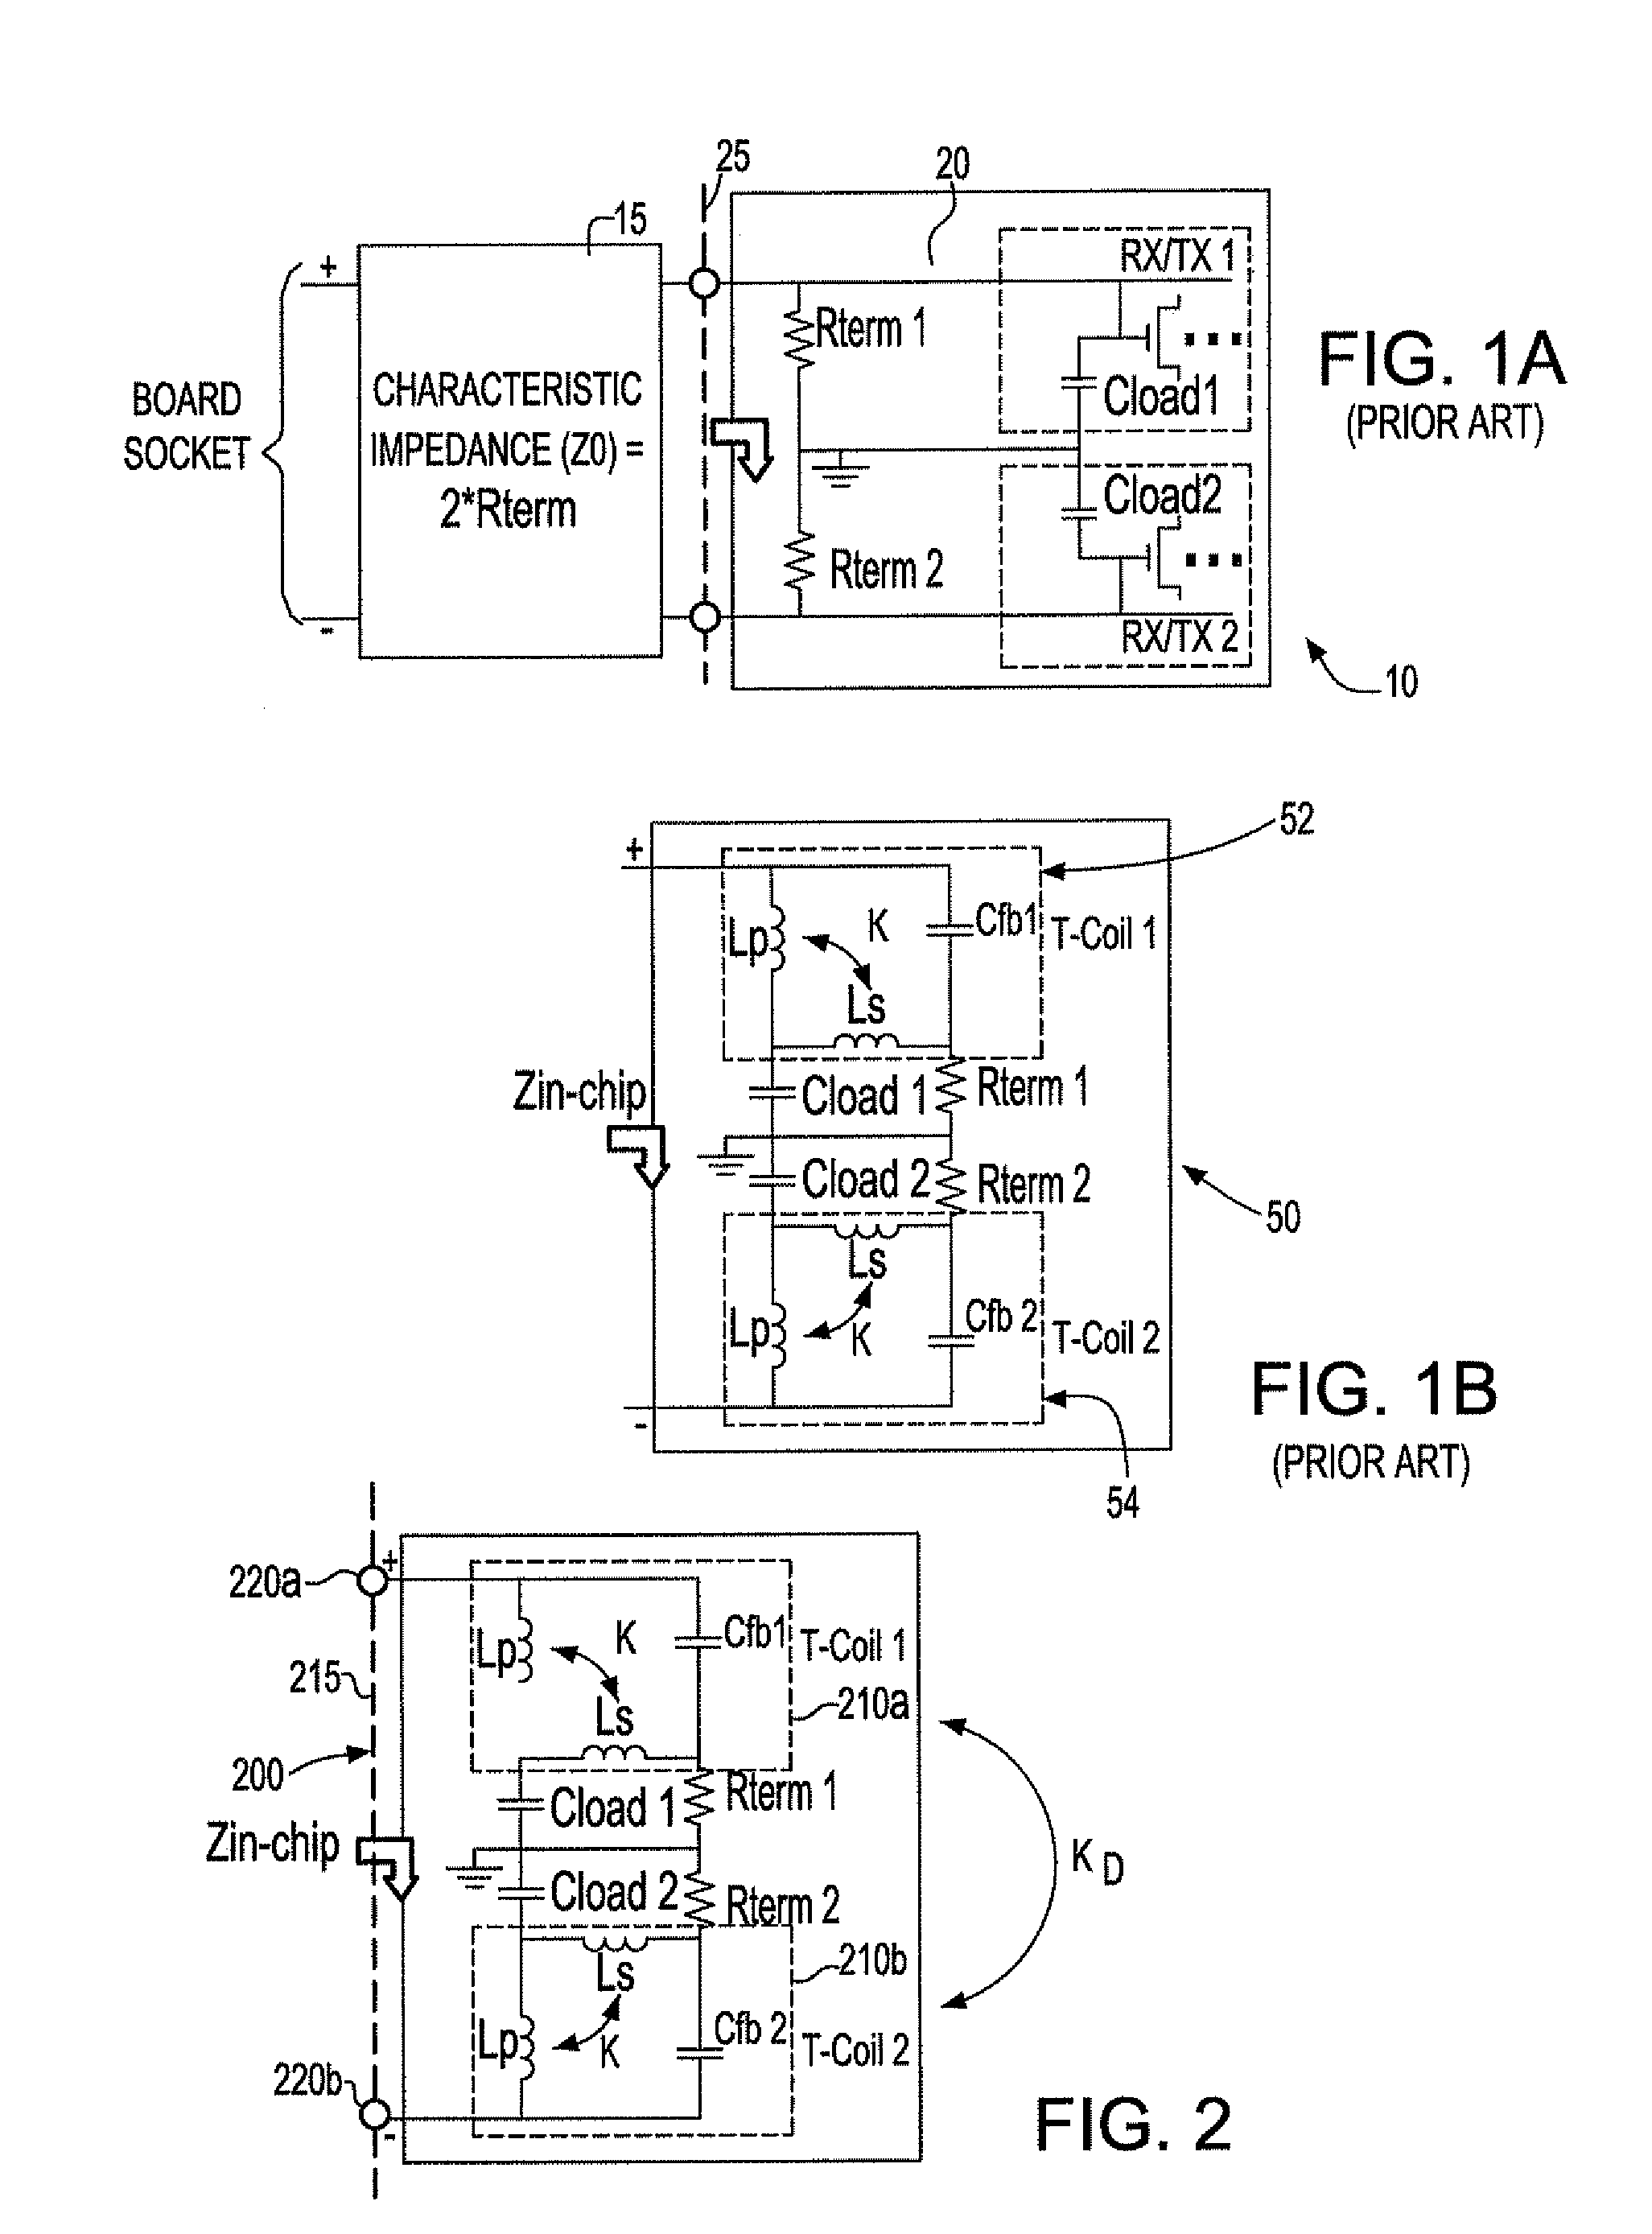 Area efficient, differential T-coil impedance-matching circuit for high speed communications applications